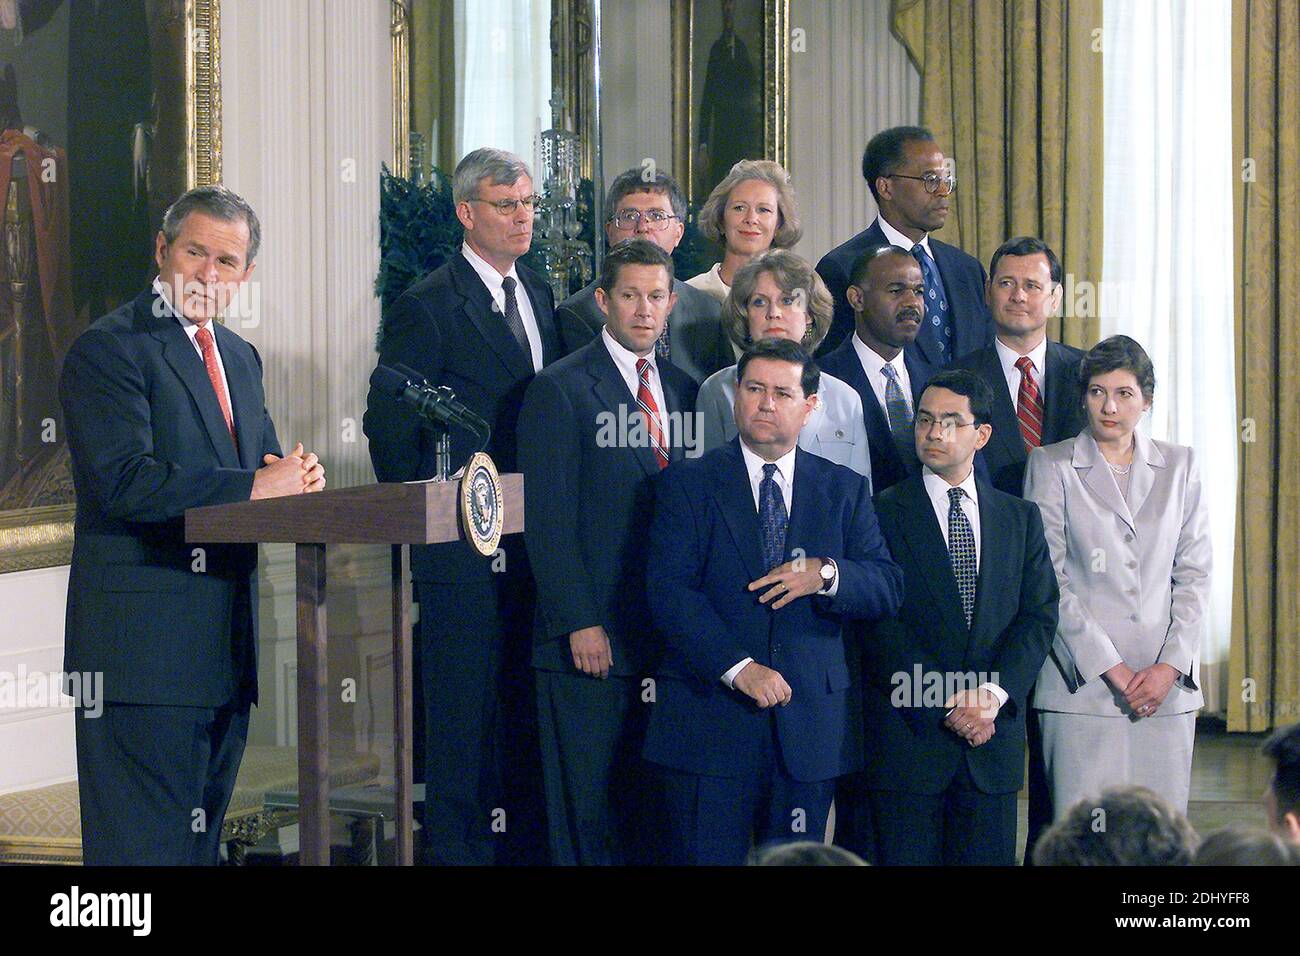 United States President George W. Bush with 11 of his first nominees for Federal judiciary nominations in an event in the East Room of the White House, May 9, 2001. The judges, left to right, Front row, Judge Dennis Shedd, Migues Estrada and Judge Priscilla Owens; Second row, Jeffrey Sutton, Judge Edith Brown Clement, Judge Roger Gregory and John Roberts; Back row, Judge Terrence Boyle, Michael McConnell, Judge Deborah Cook and Judge Barrington Parker.Photo by CNP/ABACAPRESS.COM Stock Photo